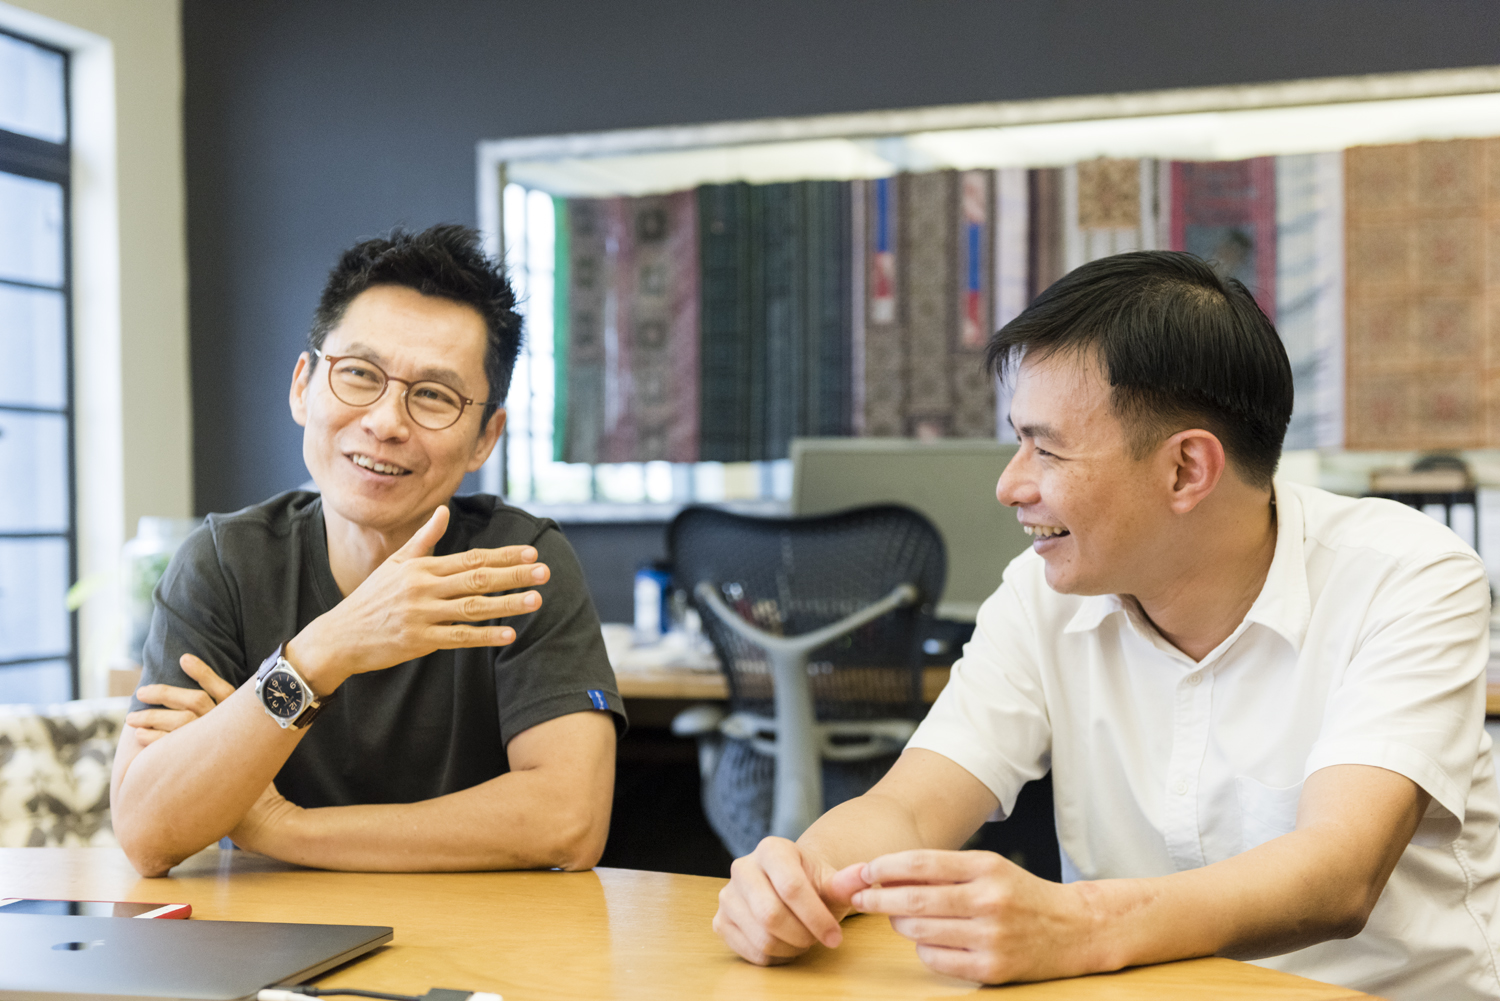 Architects Wong Mun Summ and Phua Hong Wei in their office